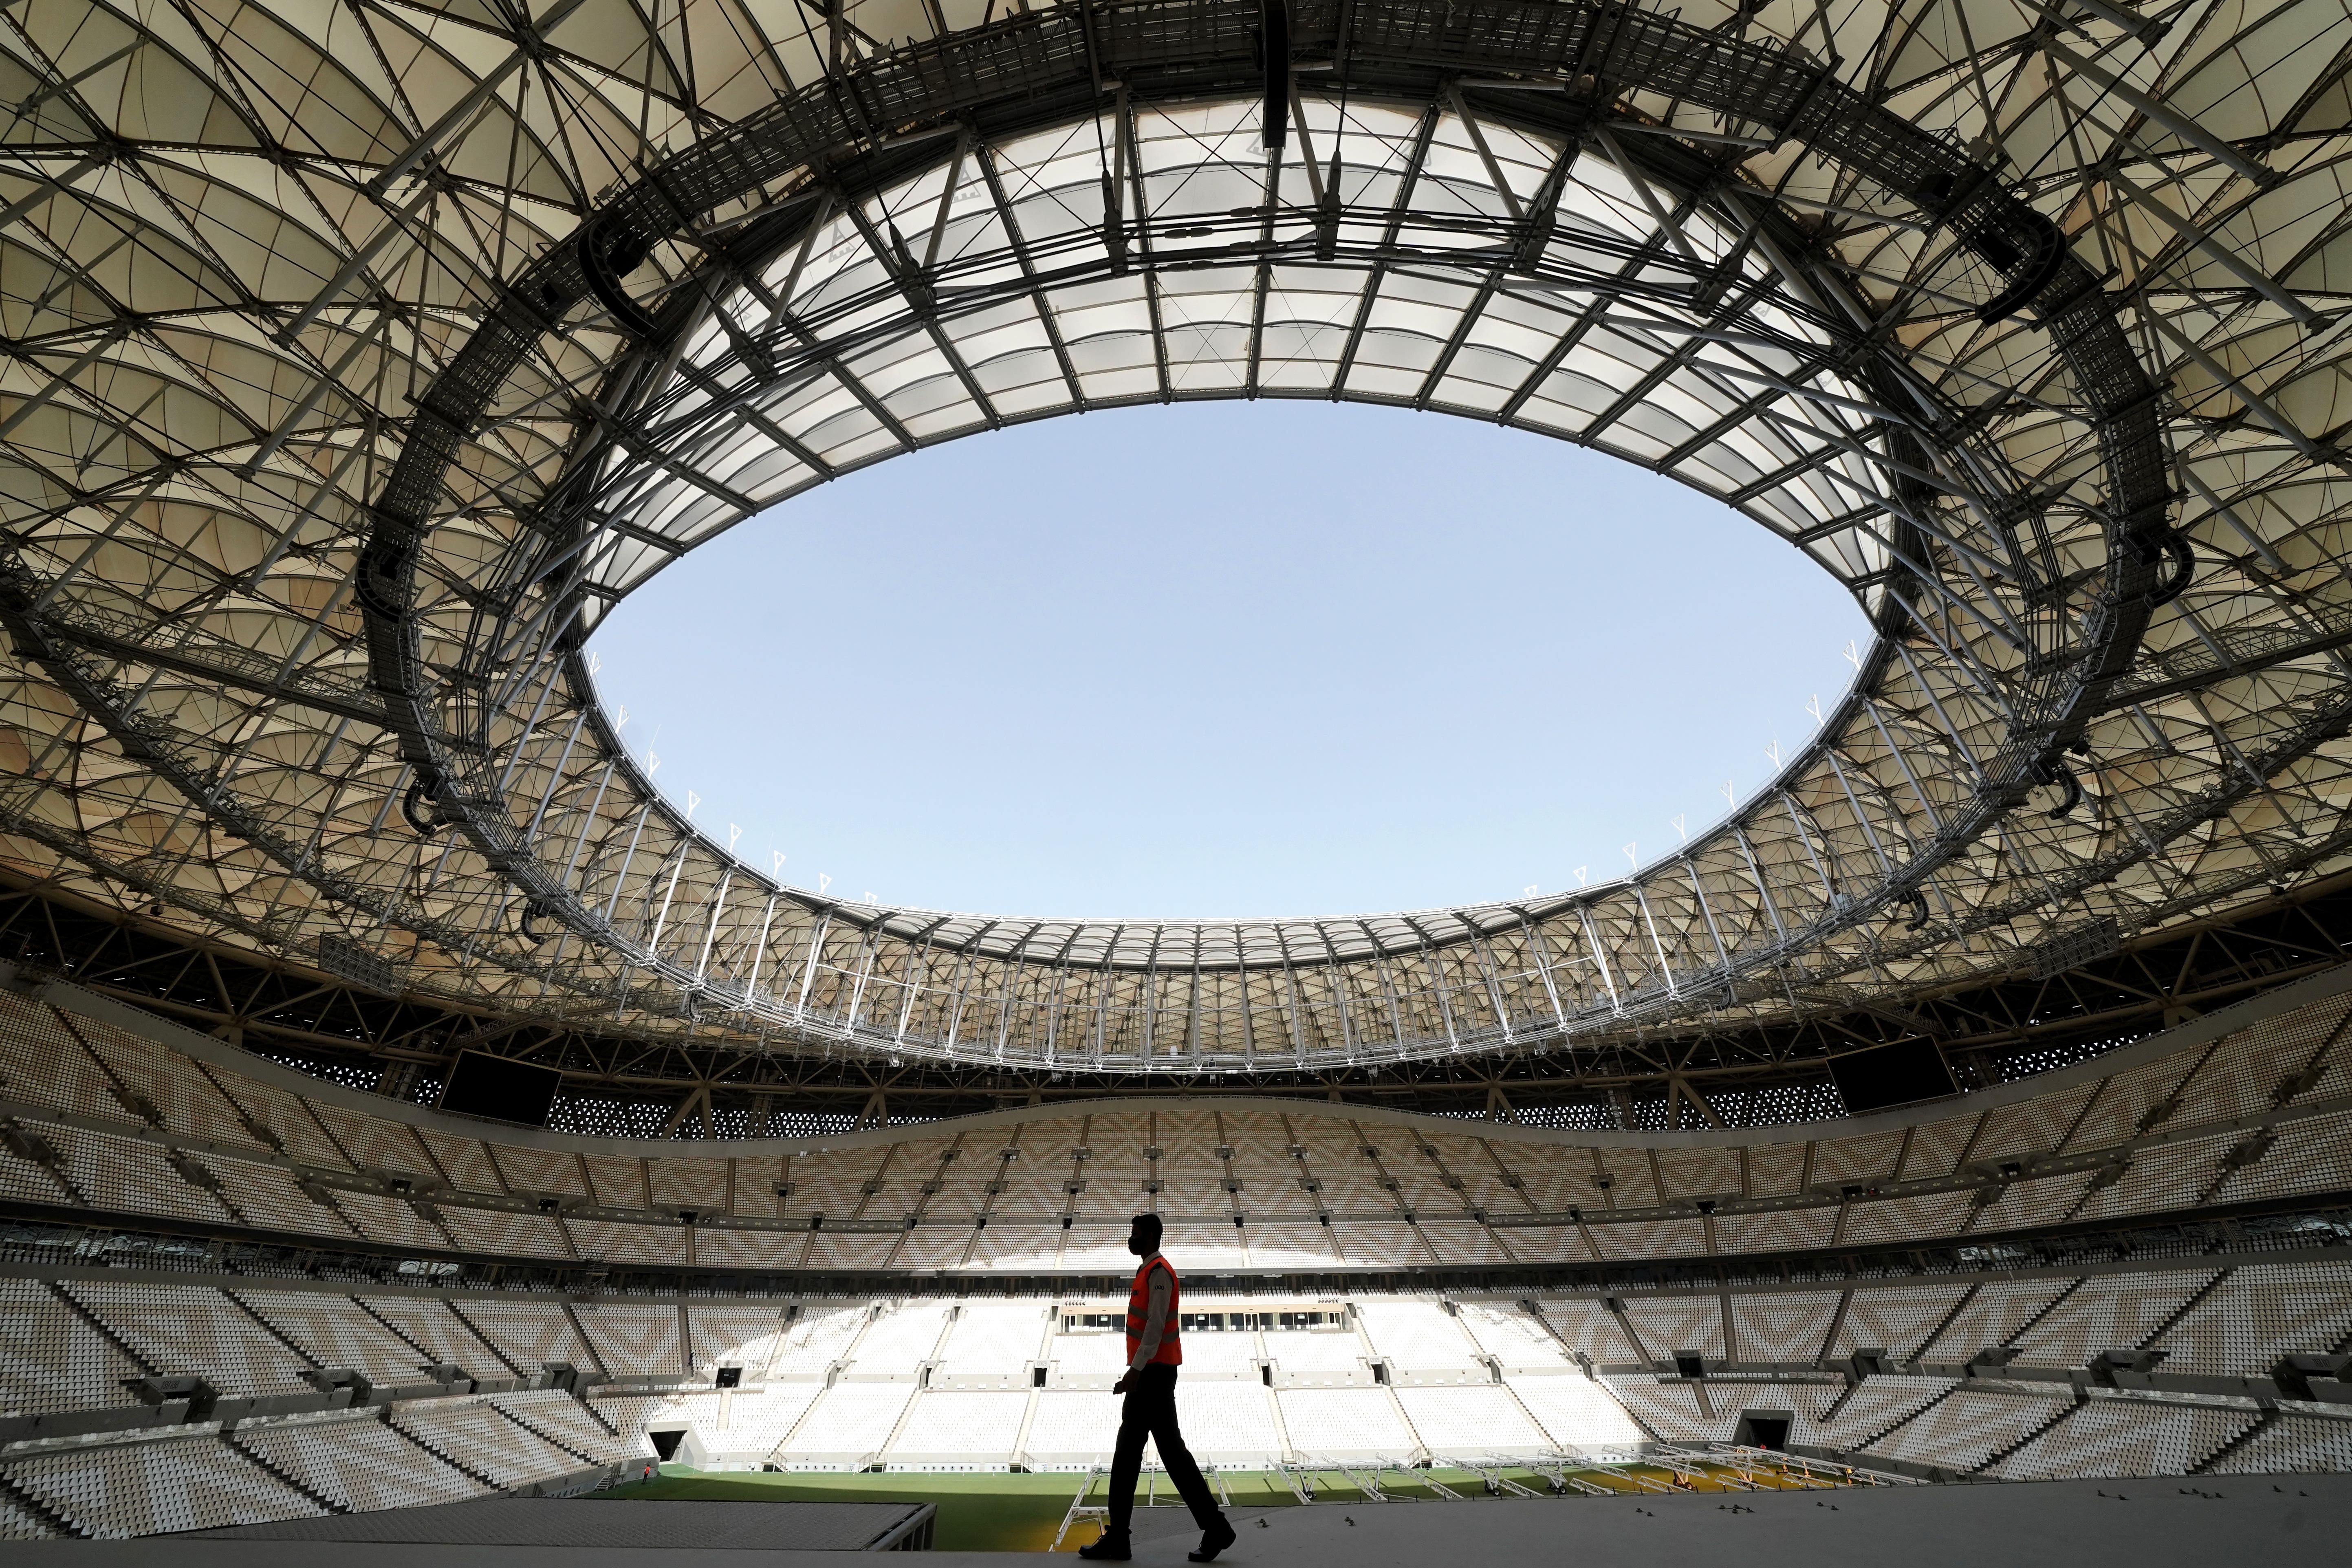 The Lusail Stadium, a venue for the Fifa World Cup